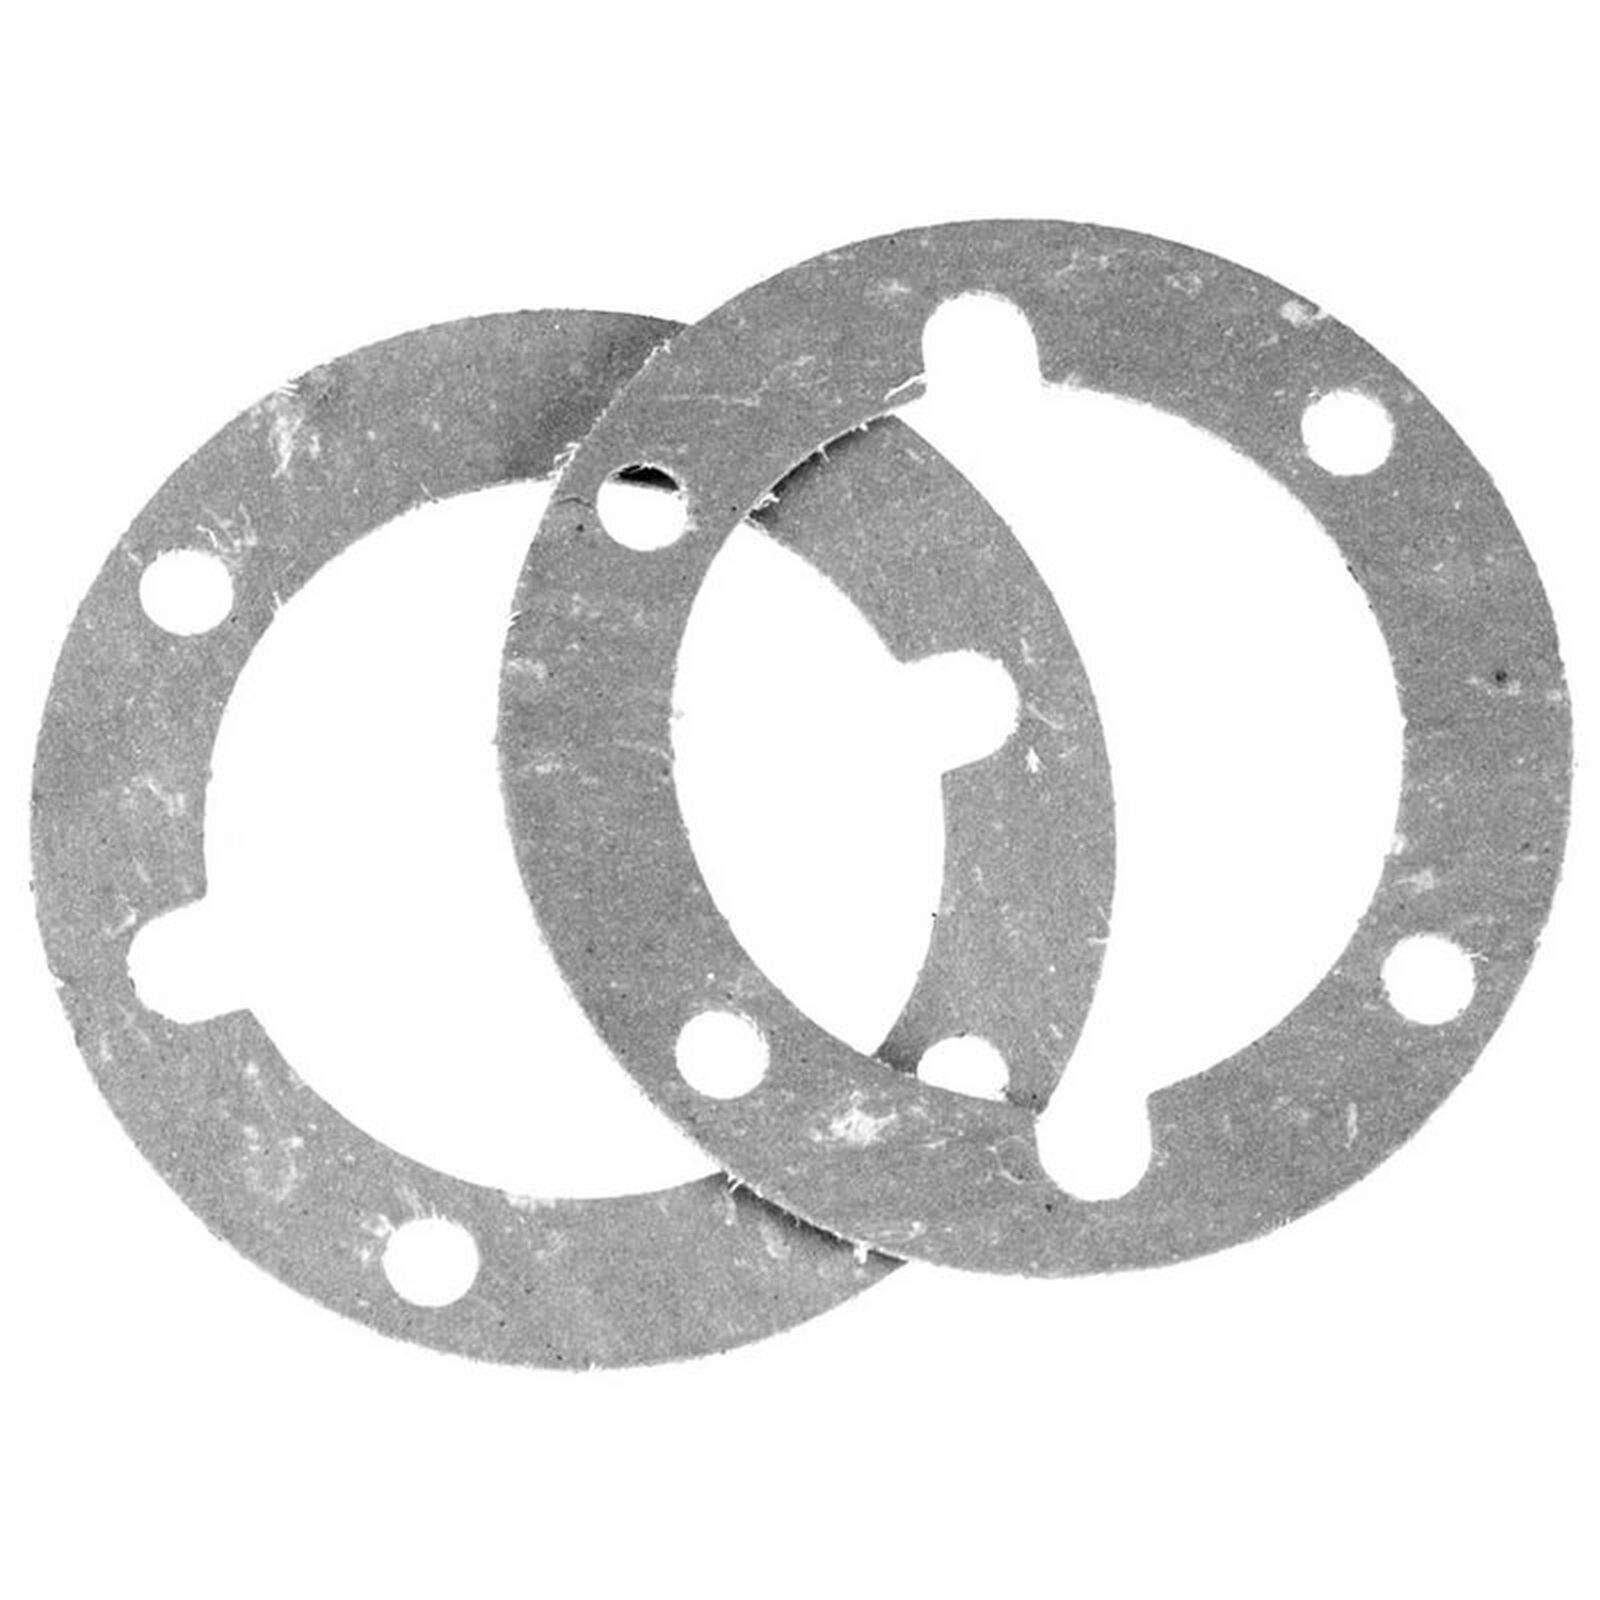 Diff Gasket, 16 x 25 x 0.5mm (Canada and EU Only)